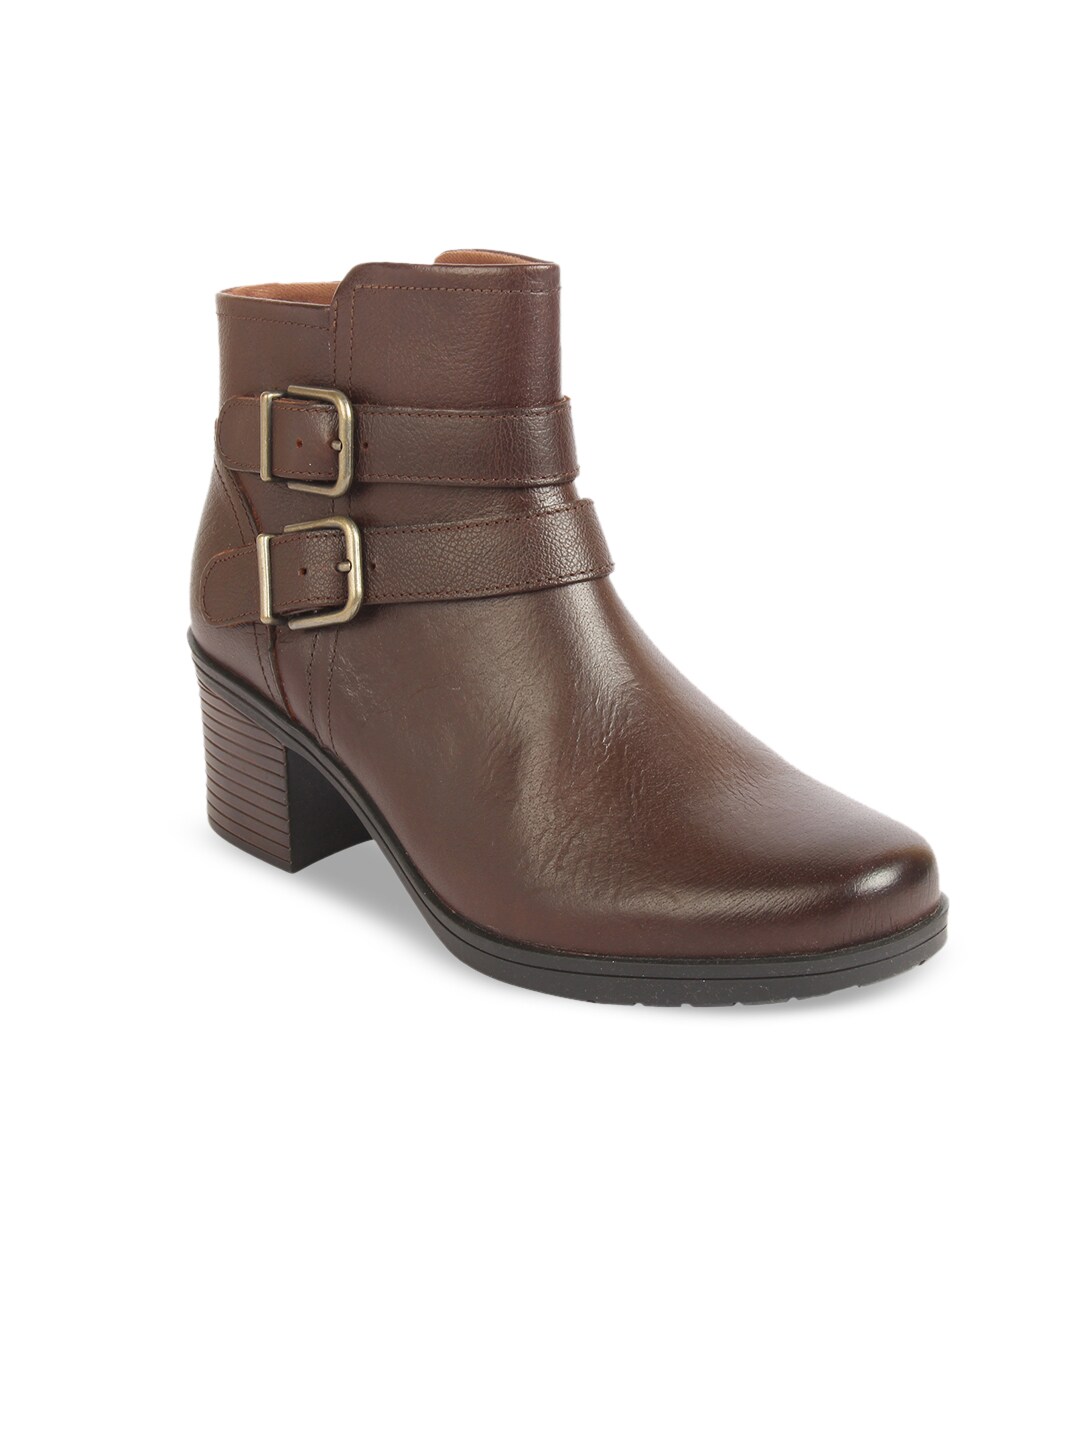 Clarks Women Brown Solid Leather Heeled Boots Price in India